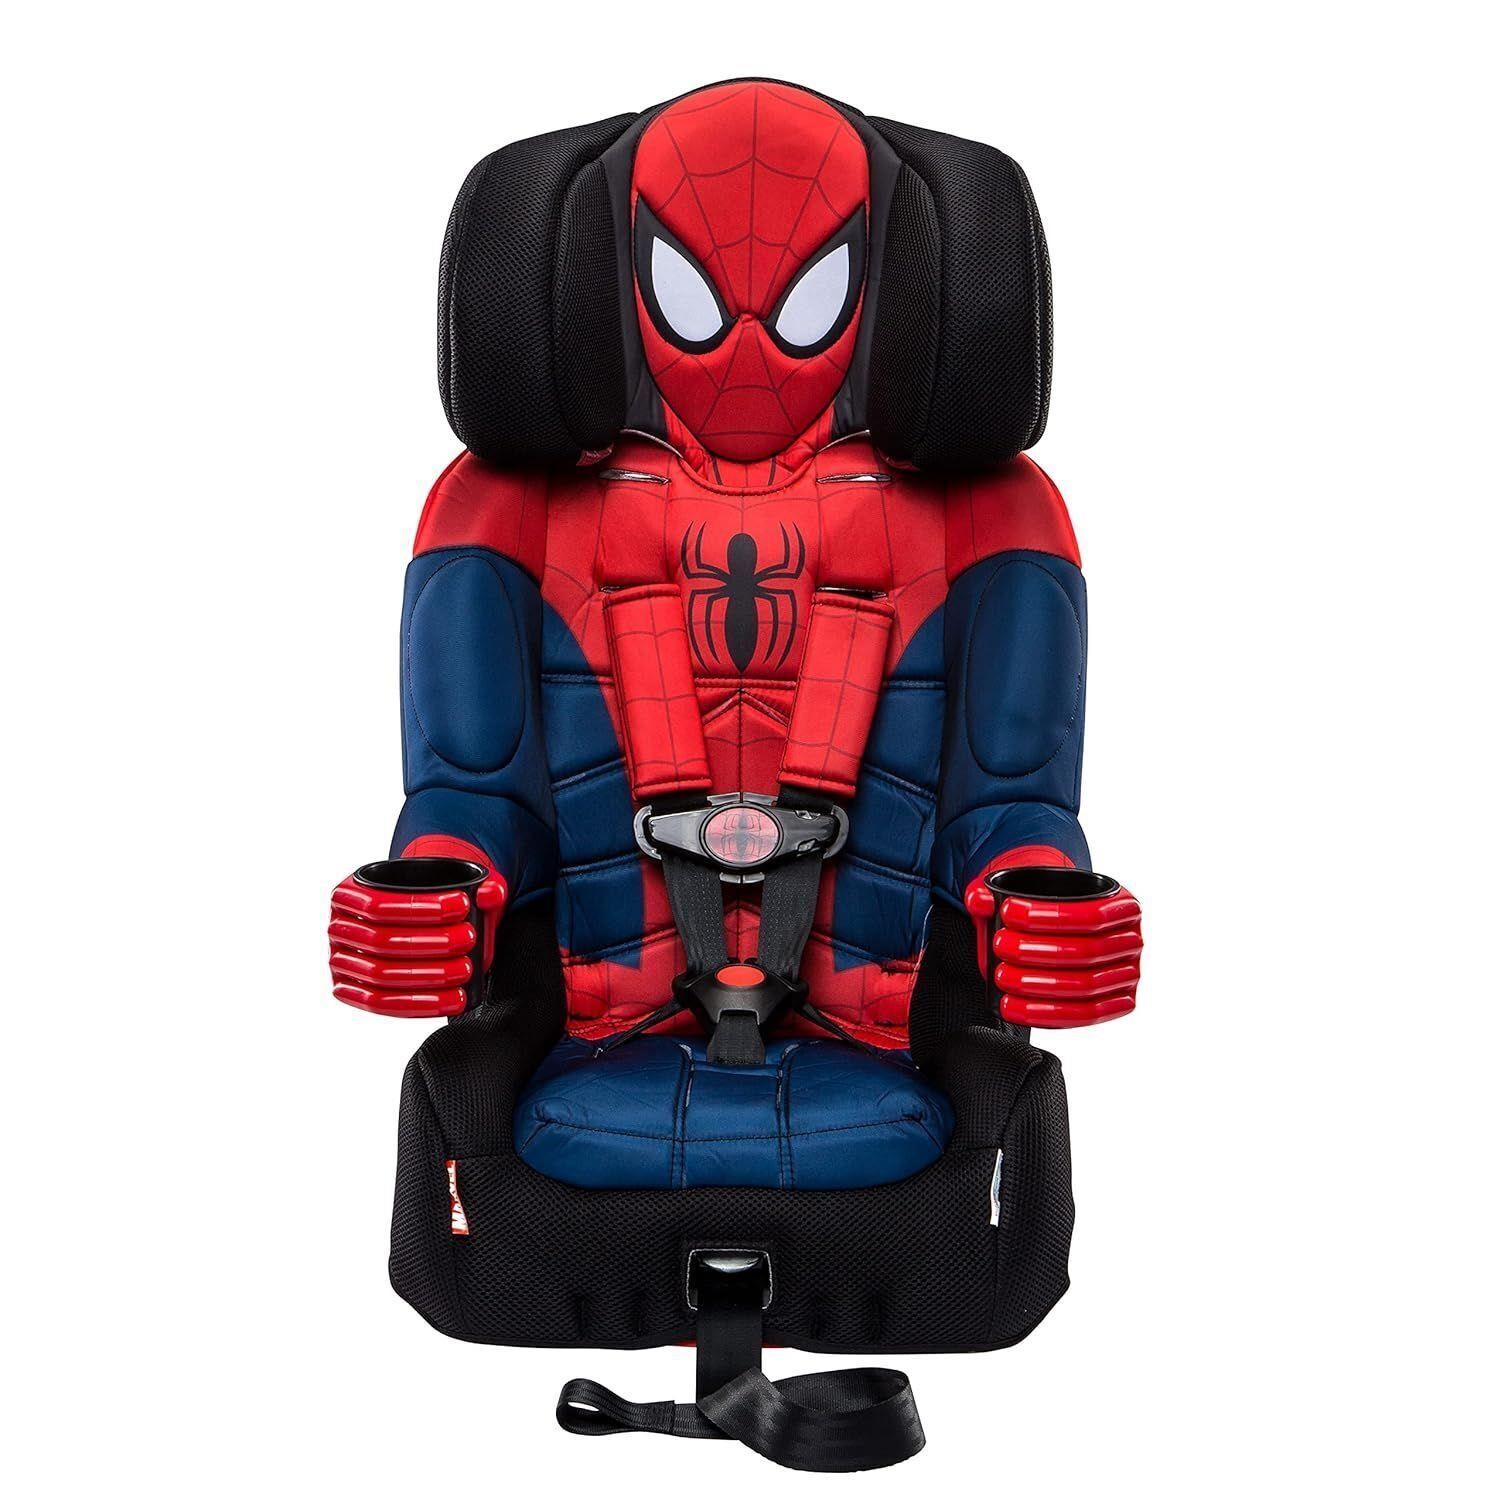 Spider-Man 2-in-1 Forward-Facing Booster Car Seat